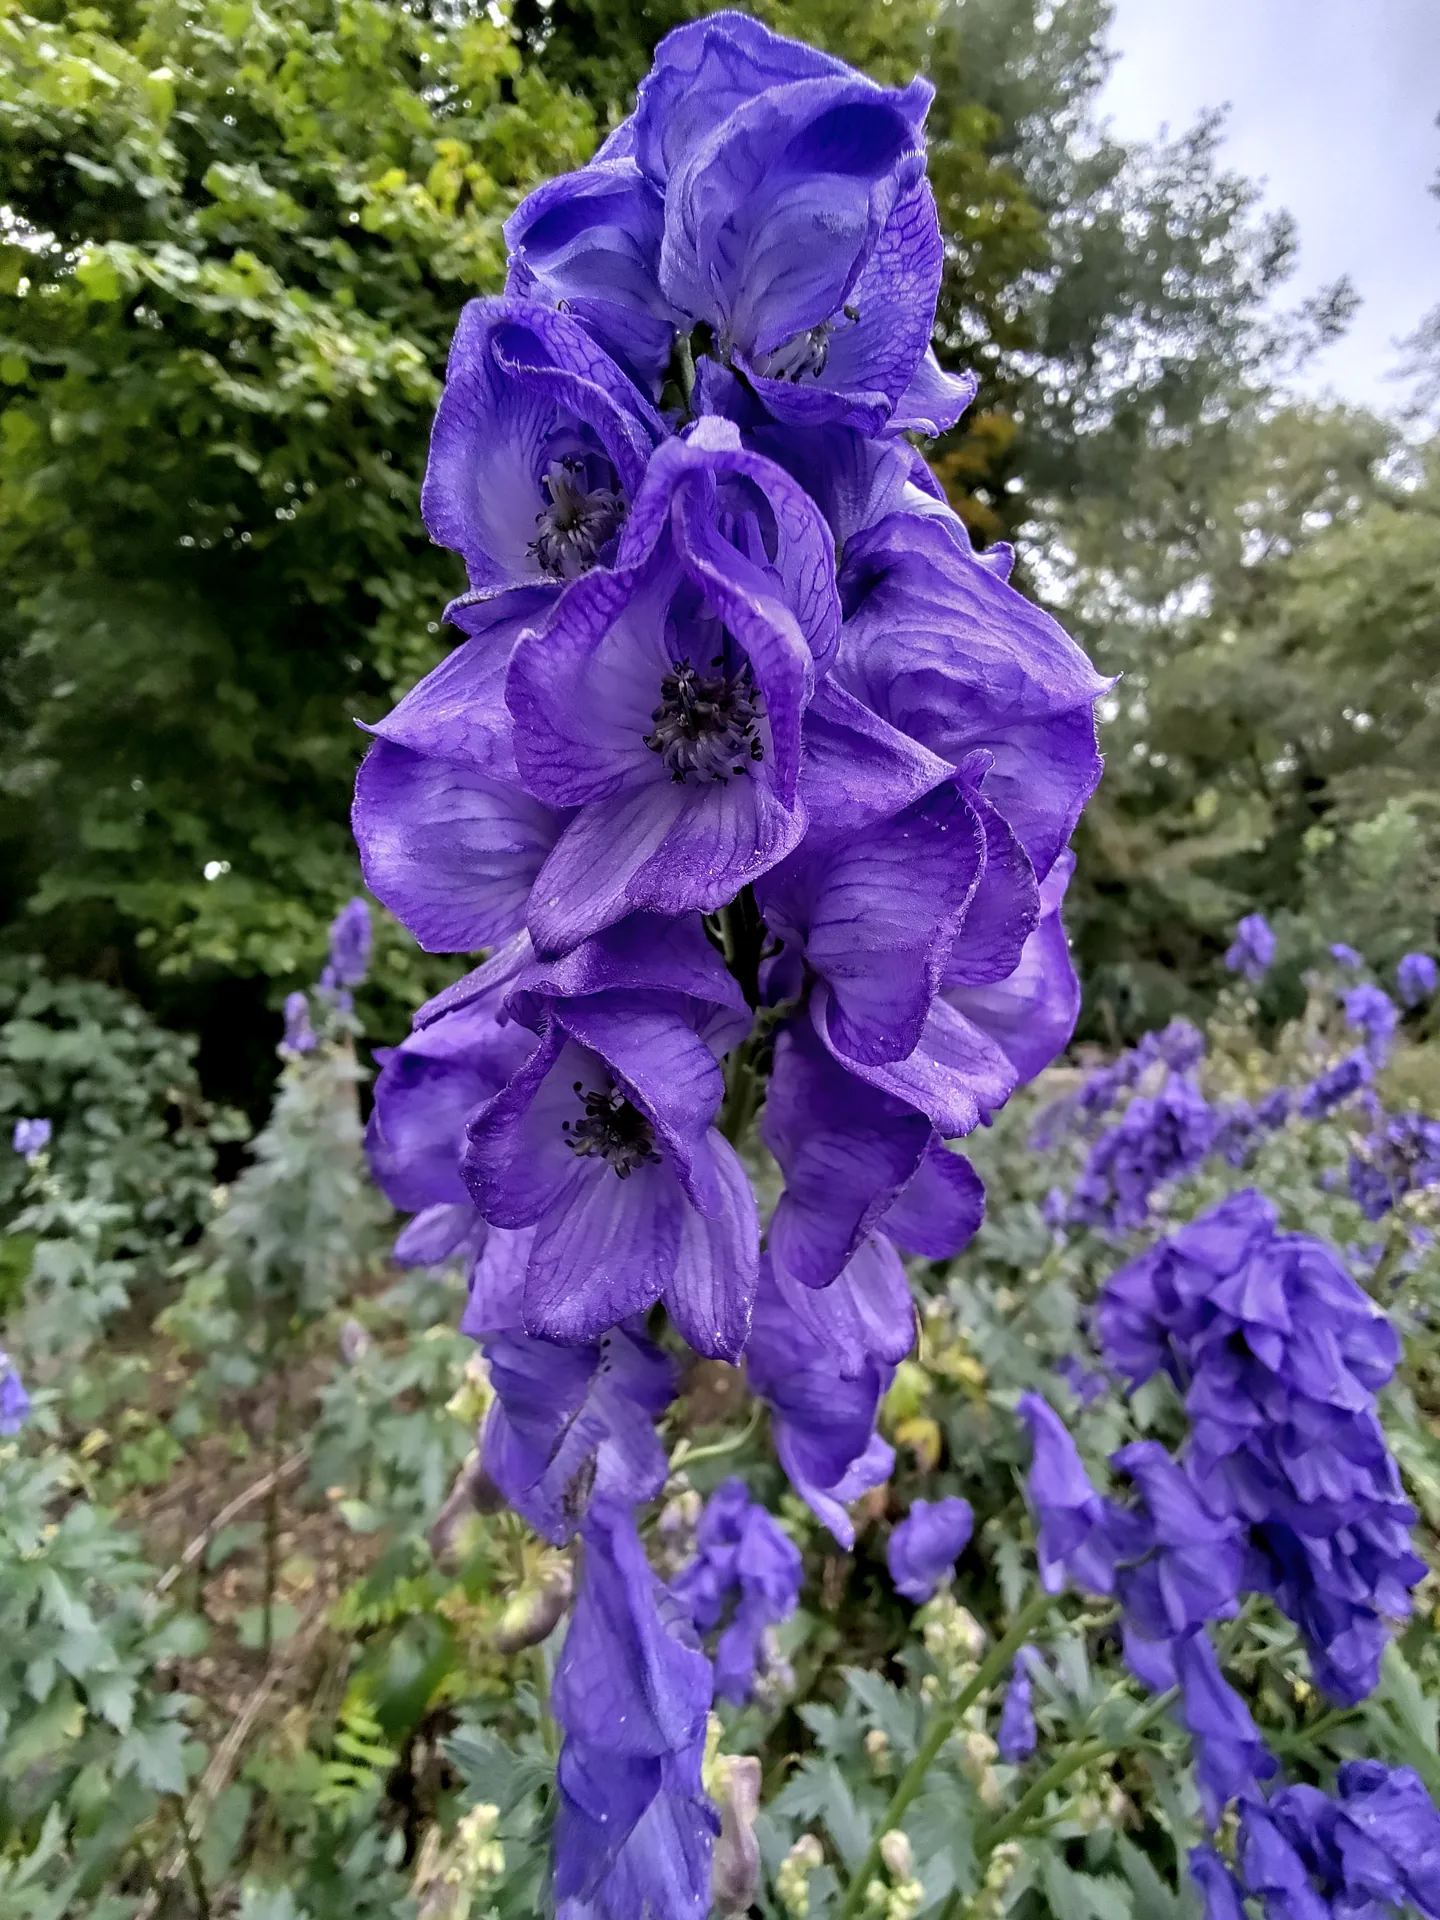 A large purple blooming flower.